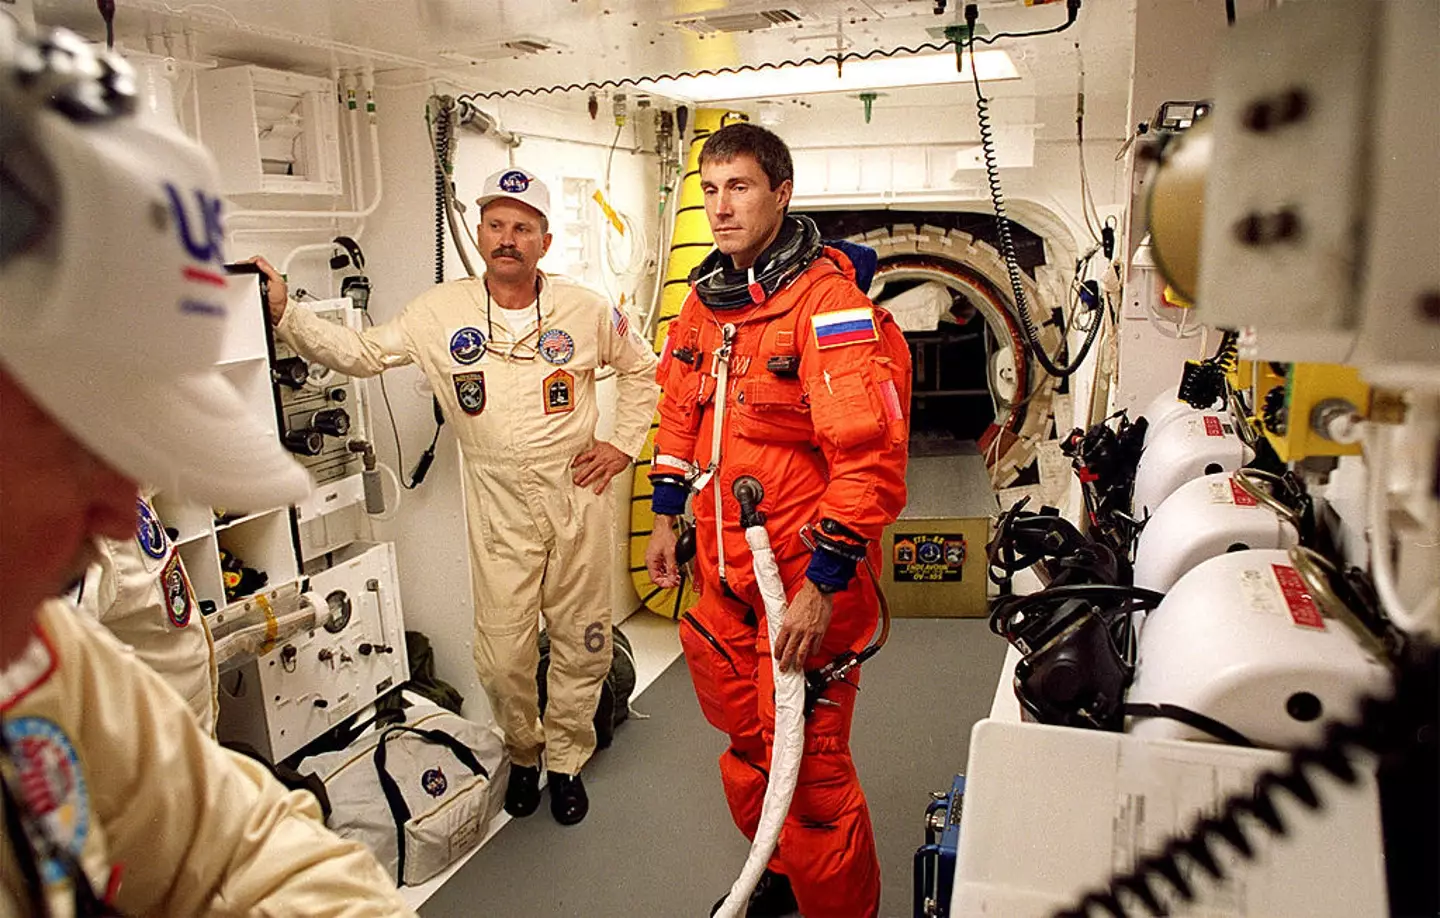 Sergei went over 800 days in space over the course of his career.